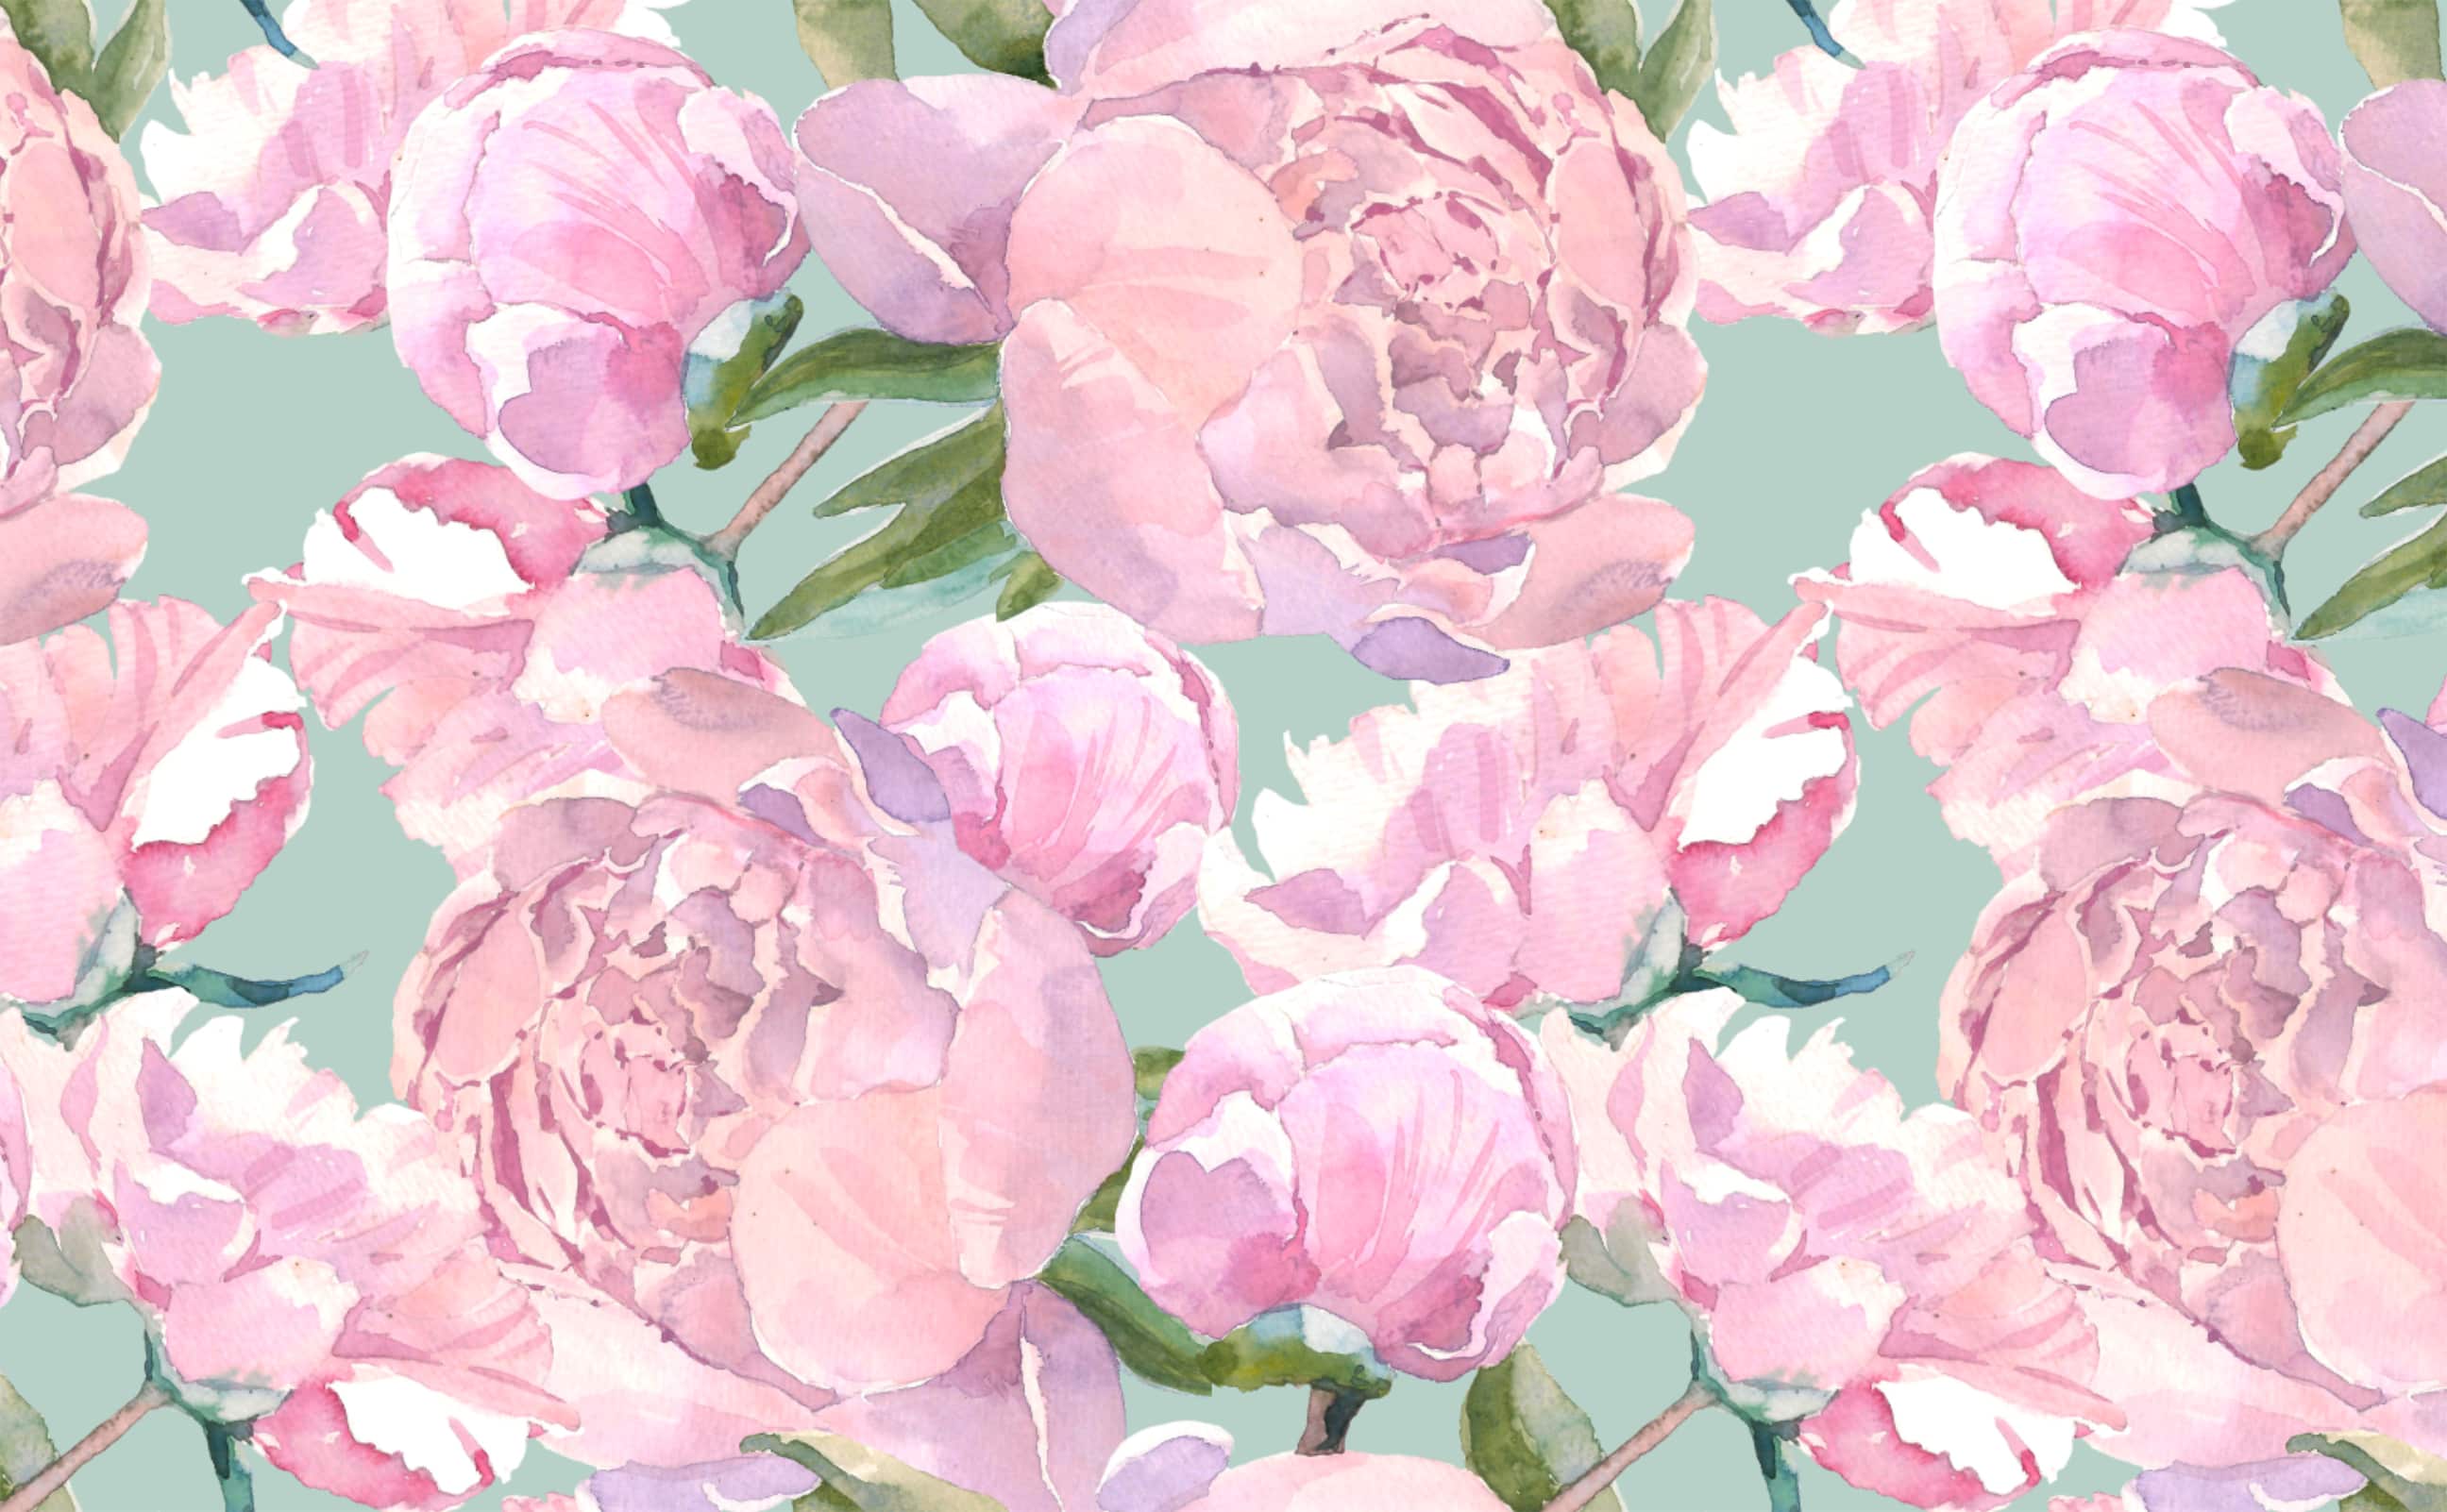 A watercolor painting of pink peonies on a blue background - Hot pink, pink, roses, cute pink, light pink, watercolor